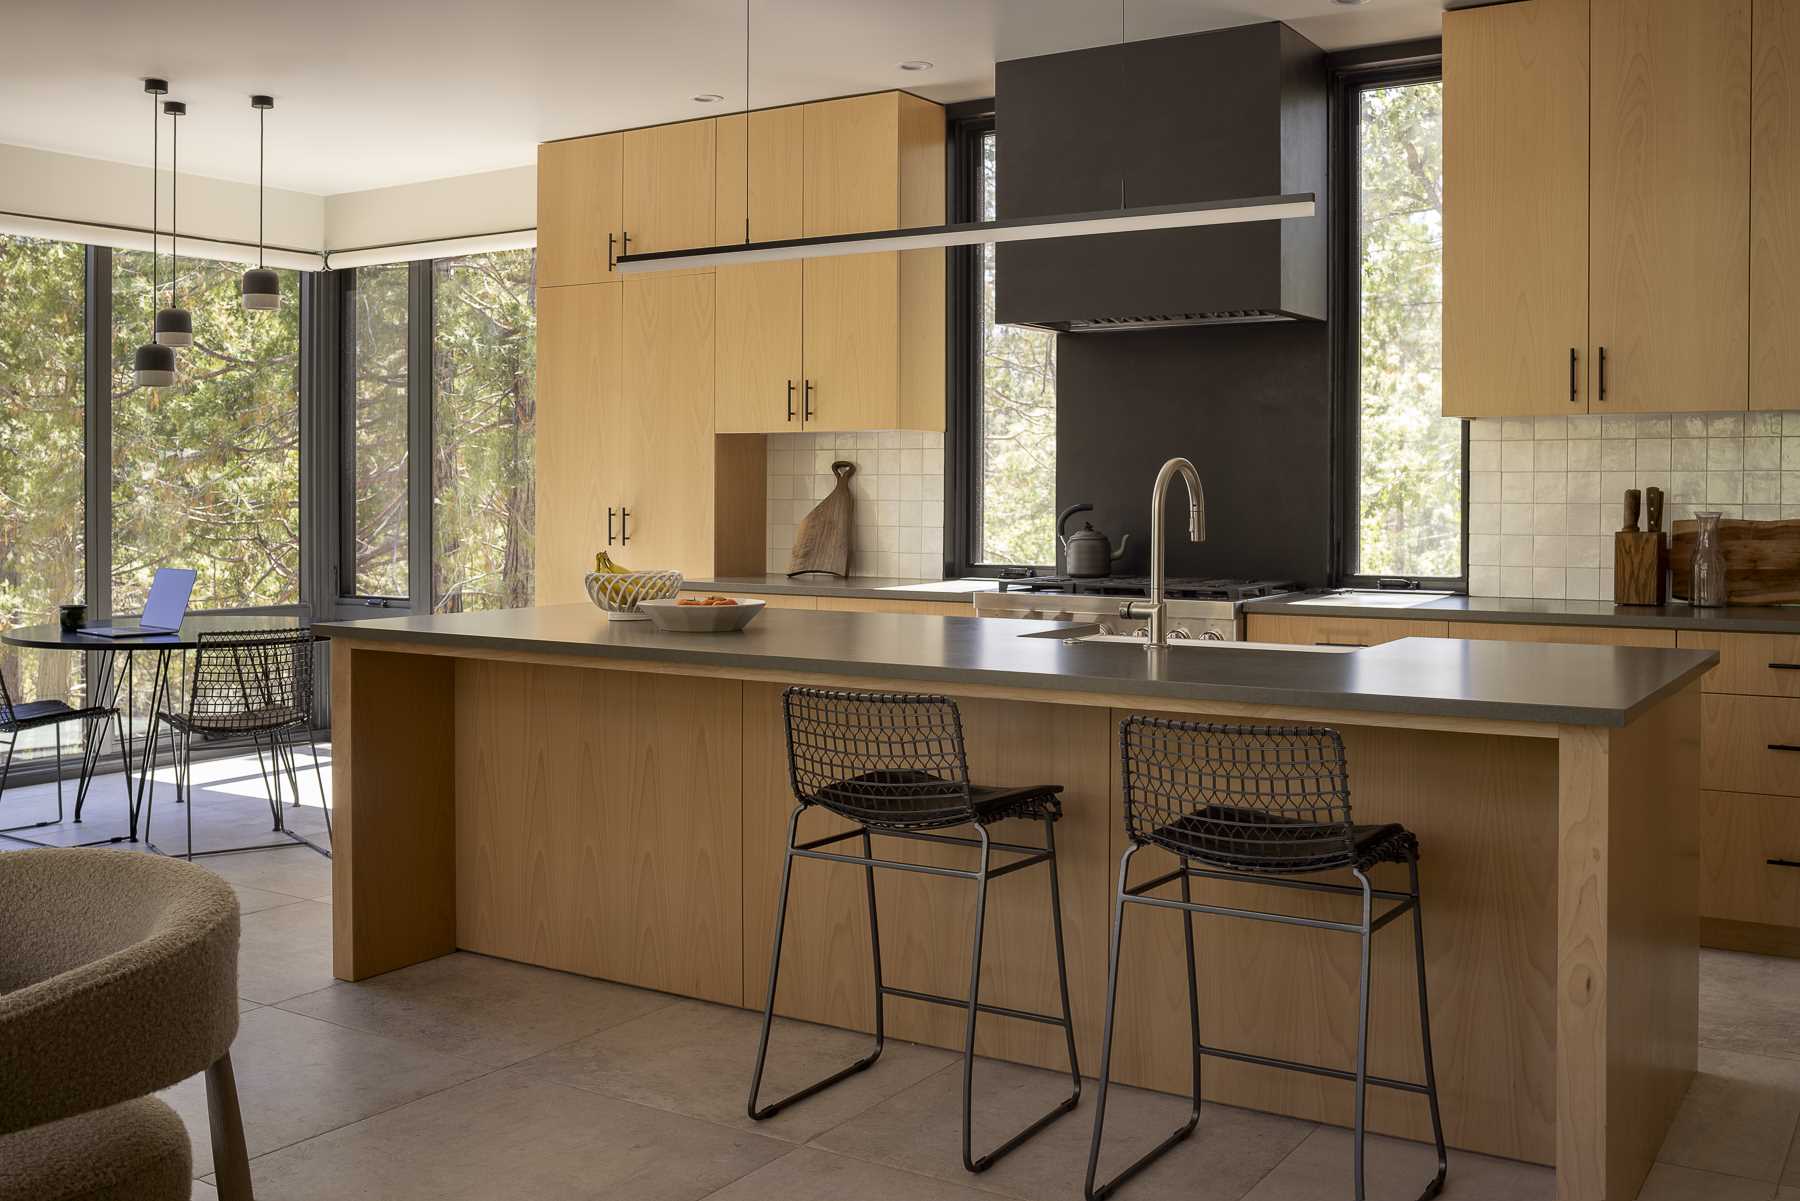 A small dining area by the windows shares the open floor plan with the kitchen, which showcases Beech Veneer cabinets and grey quartz countertops.